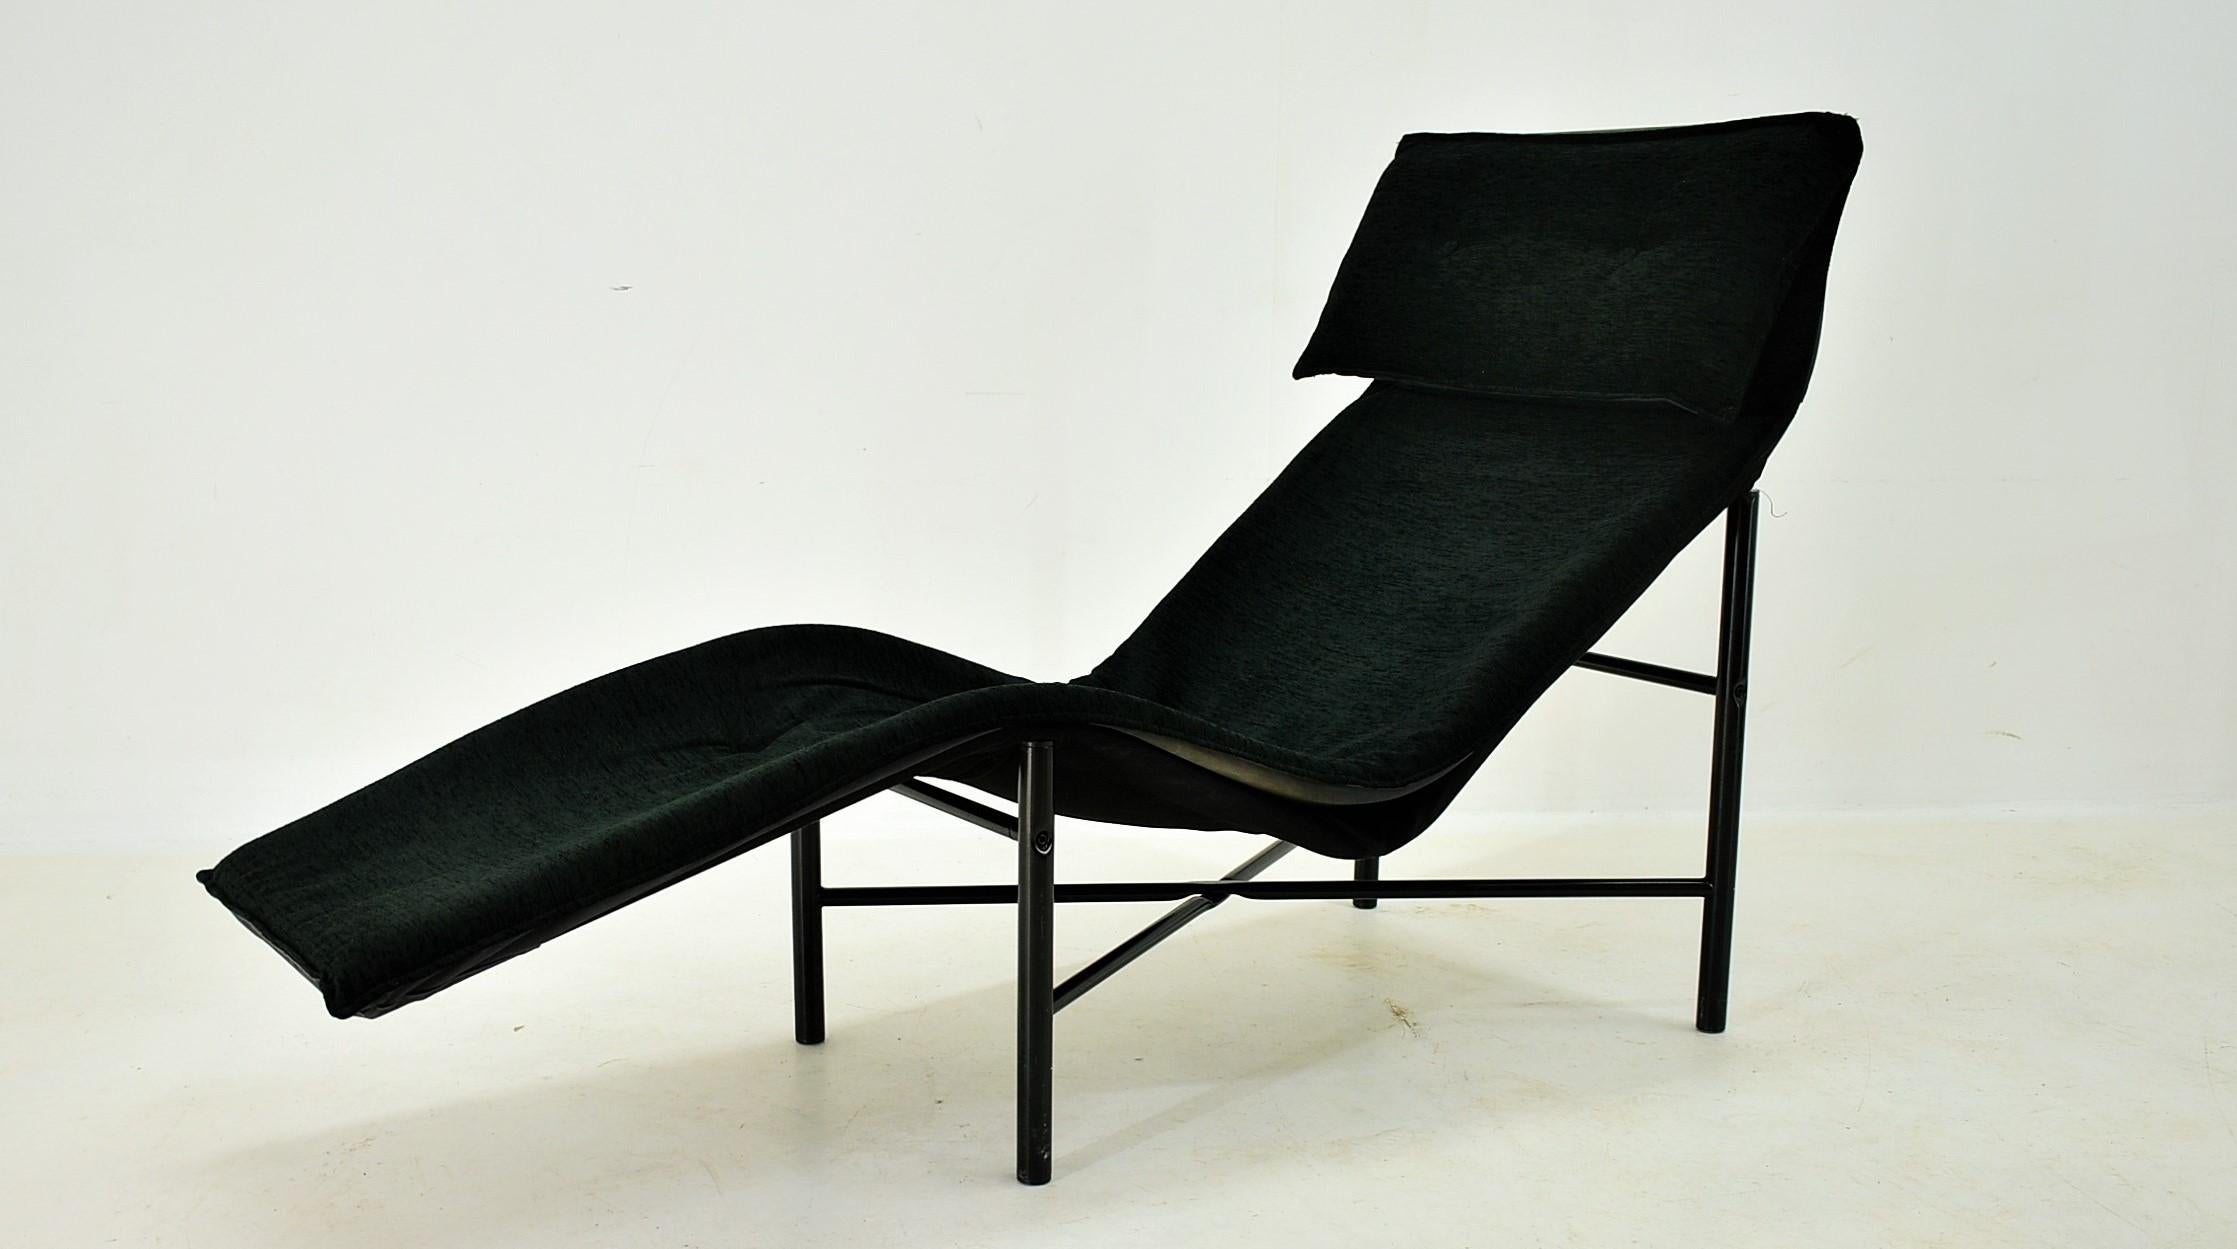 This vintage chaise lounge by Tord Bjorklund, 1970 Sweden, combines comfort and timeless design.
The upholstery of the chaise lounge was covered with black fabric and shows a good.
Also the base was made of grey lacquered tube steel and is very